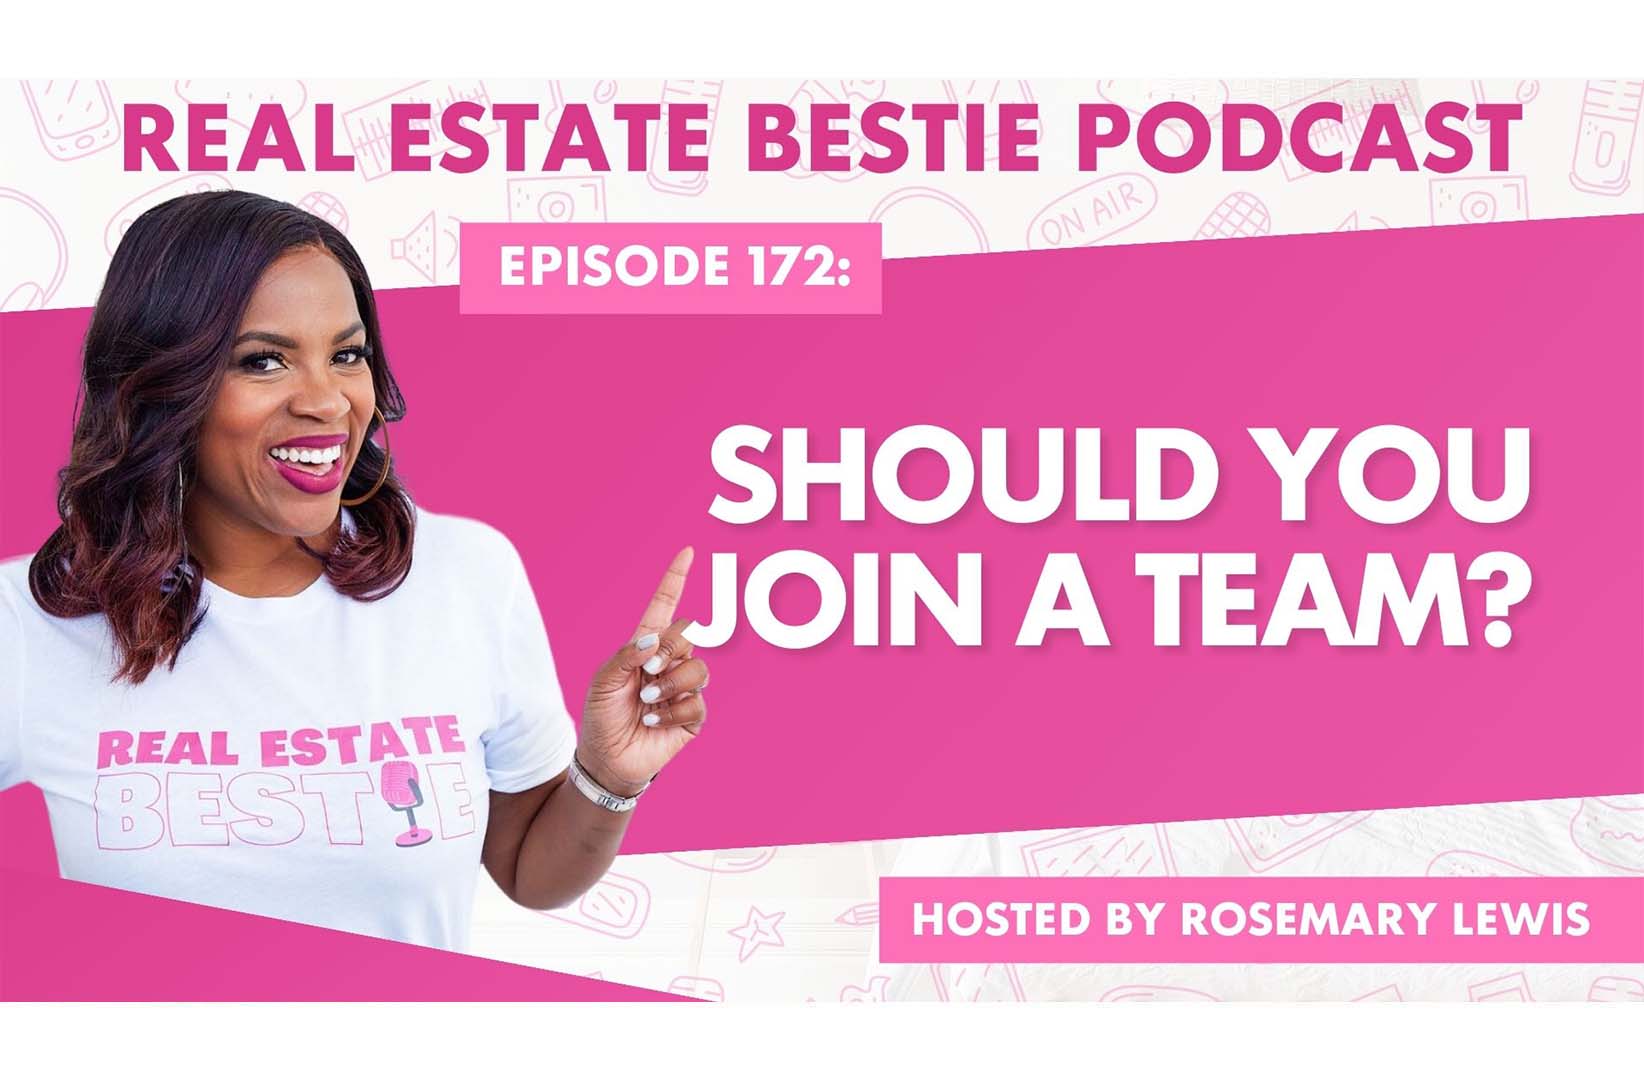 It’s All Smoke and Mirrors - Real Estate Bestie Podcast - Rosemary Lewis